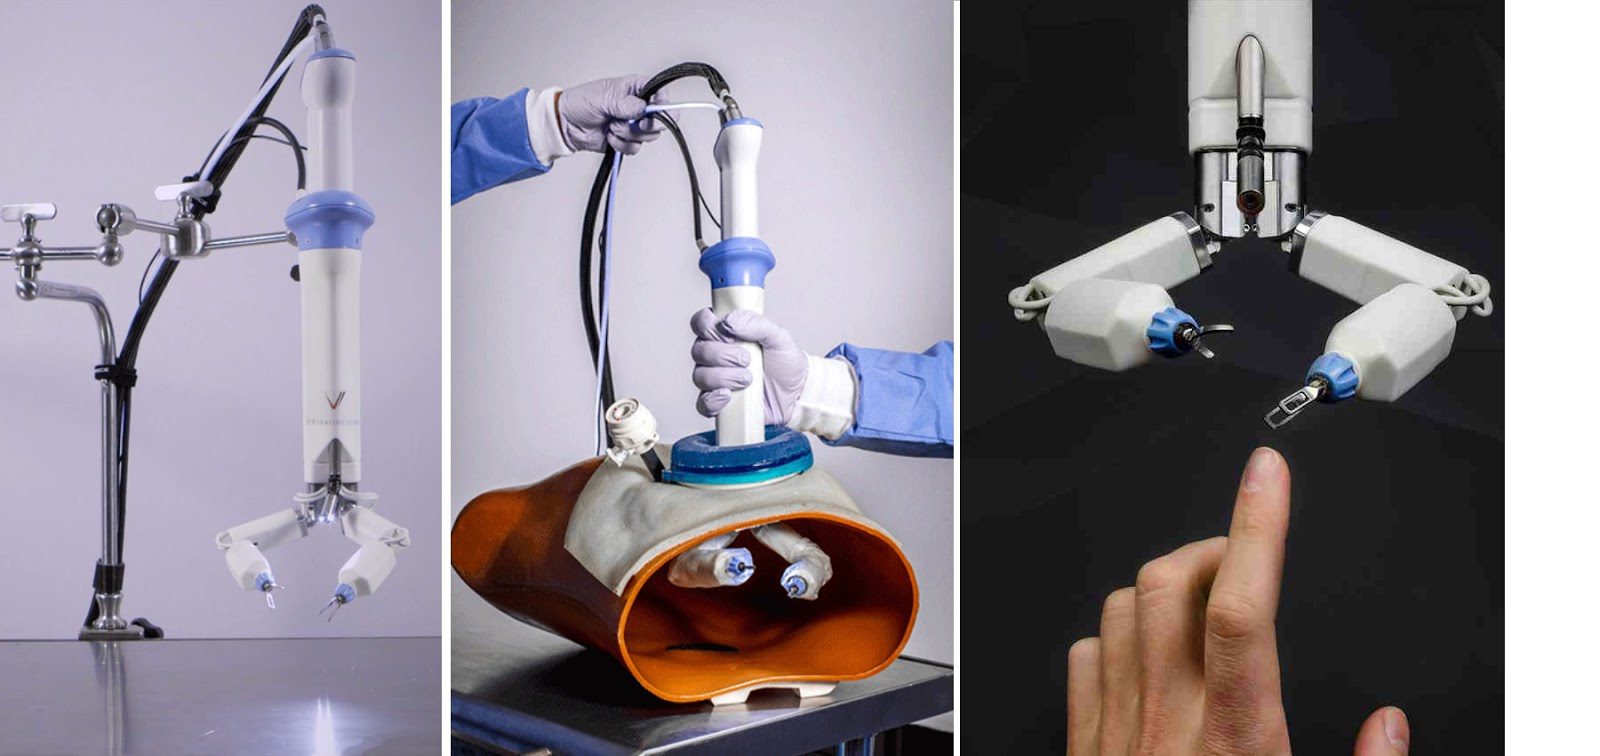 THE FUTURE OF SURGERY IS ROBOTS AND ARTIFICIAL INTELLIGENCE